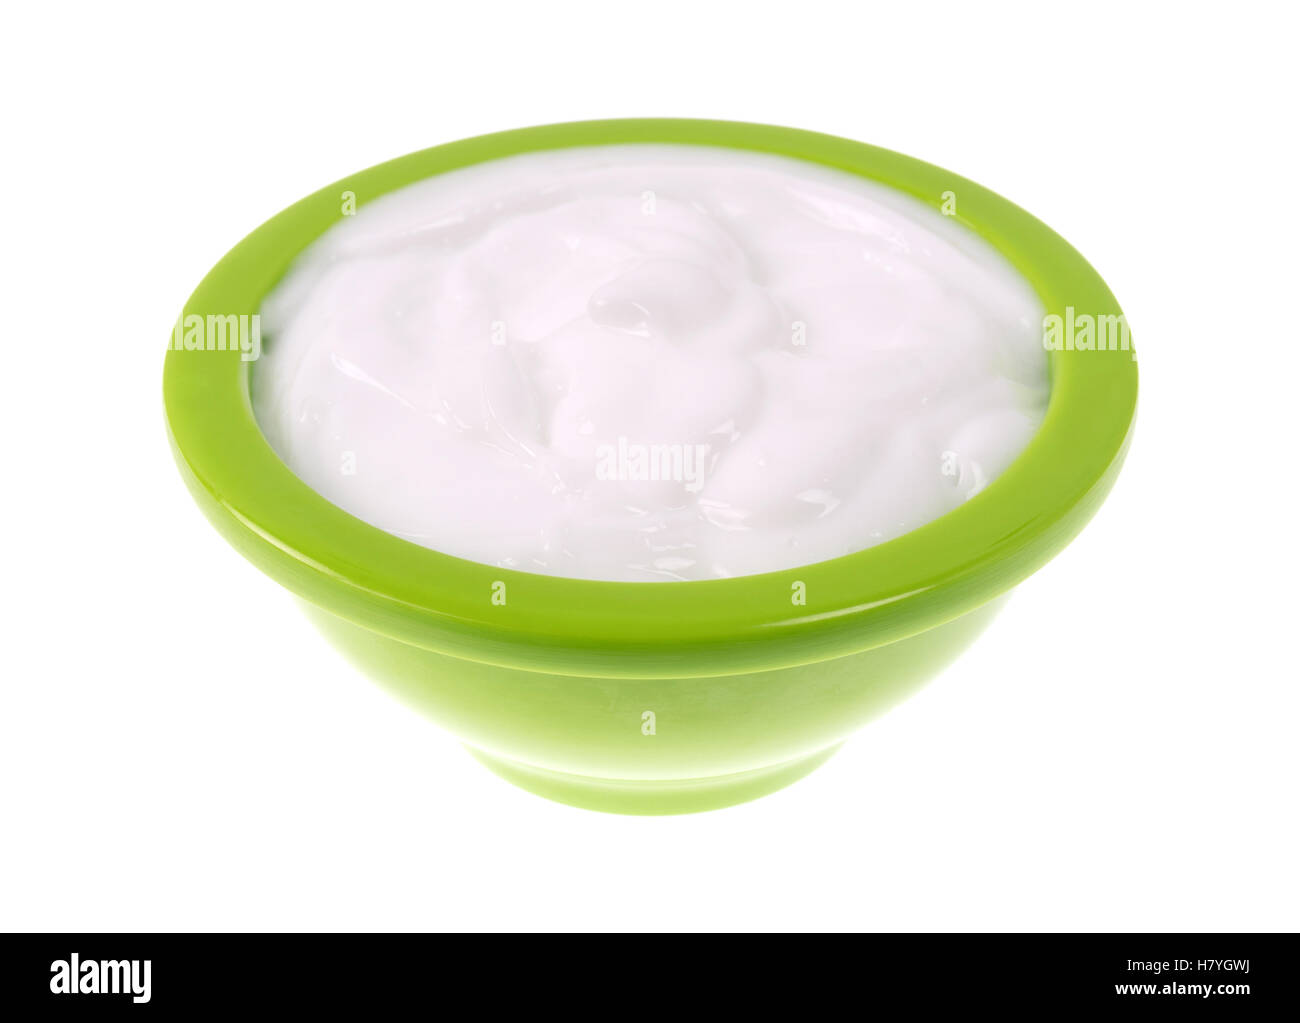 A small green bowl of vitamin E lotion isolated on a white background. Stock Photo